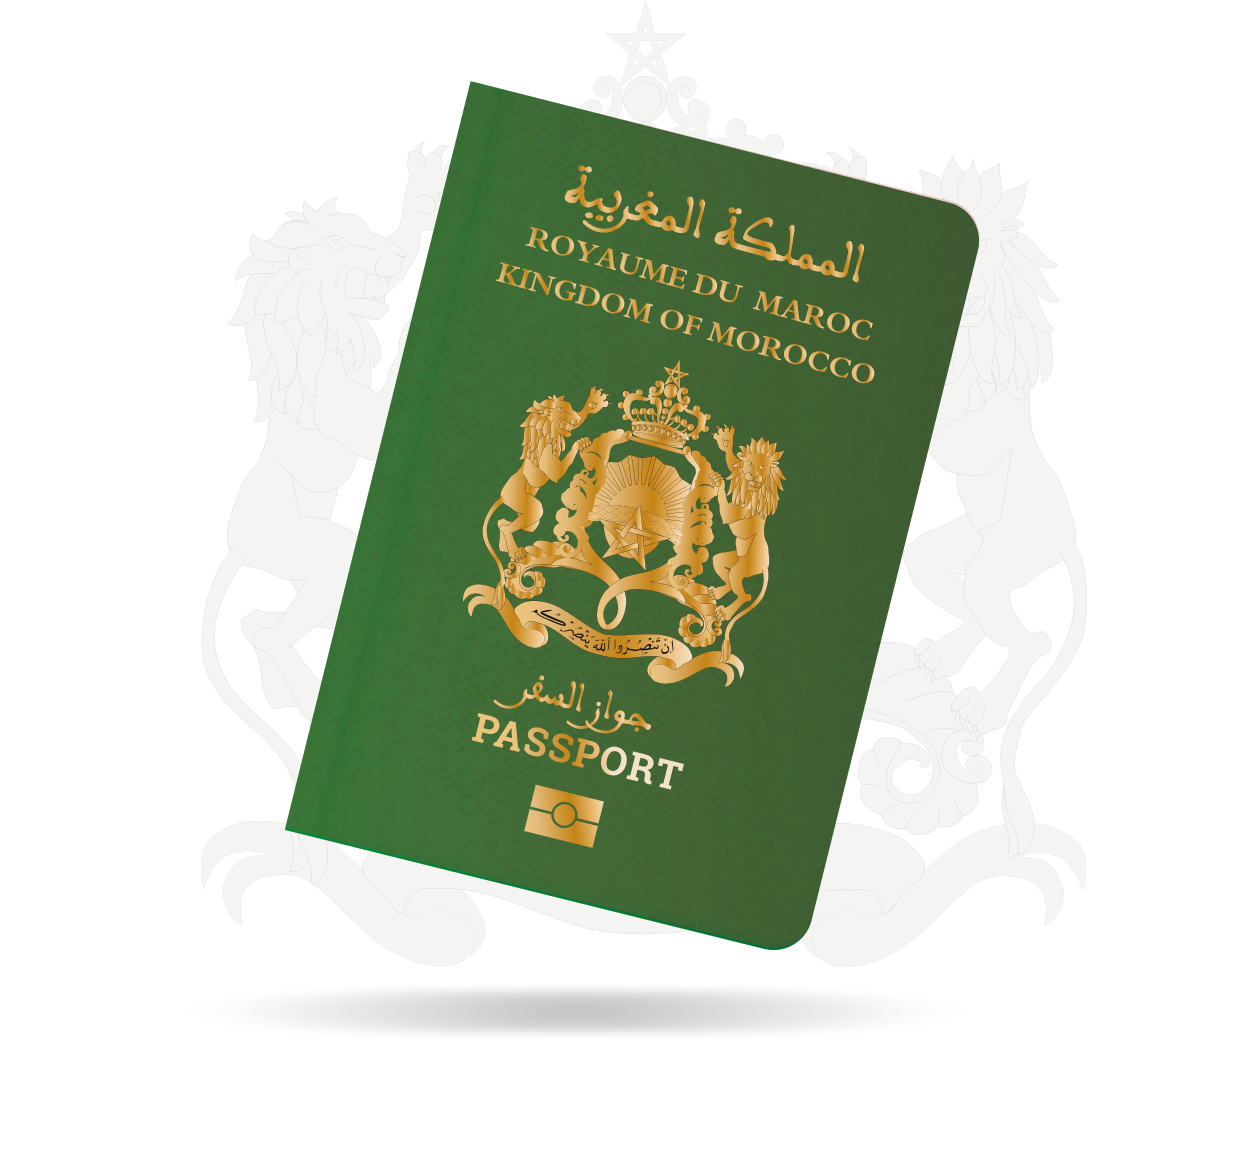 71 Visa-free countries for Moroccans